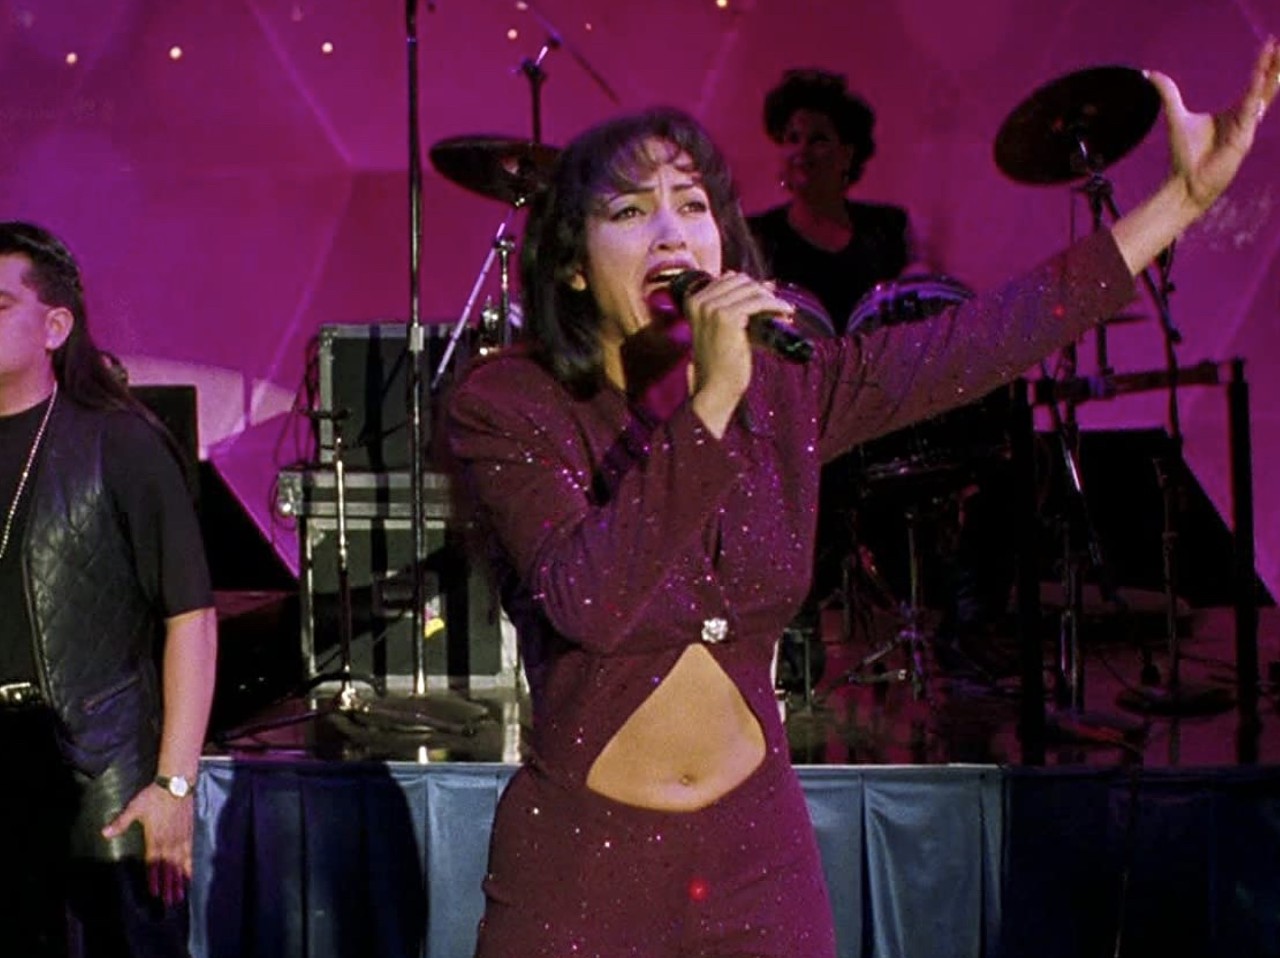 You can never watch Selena too many times.